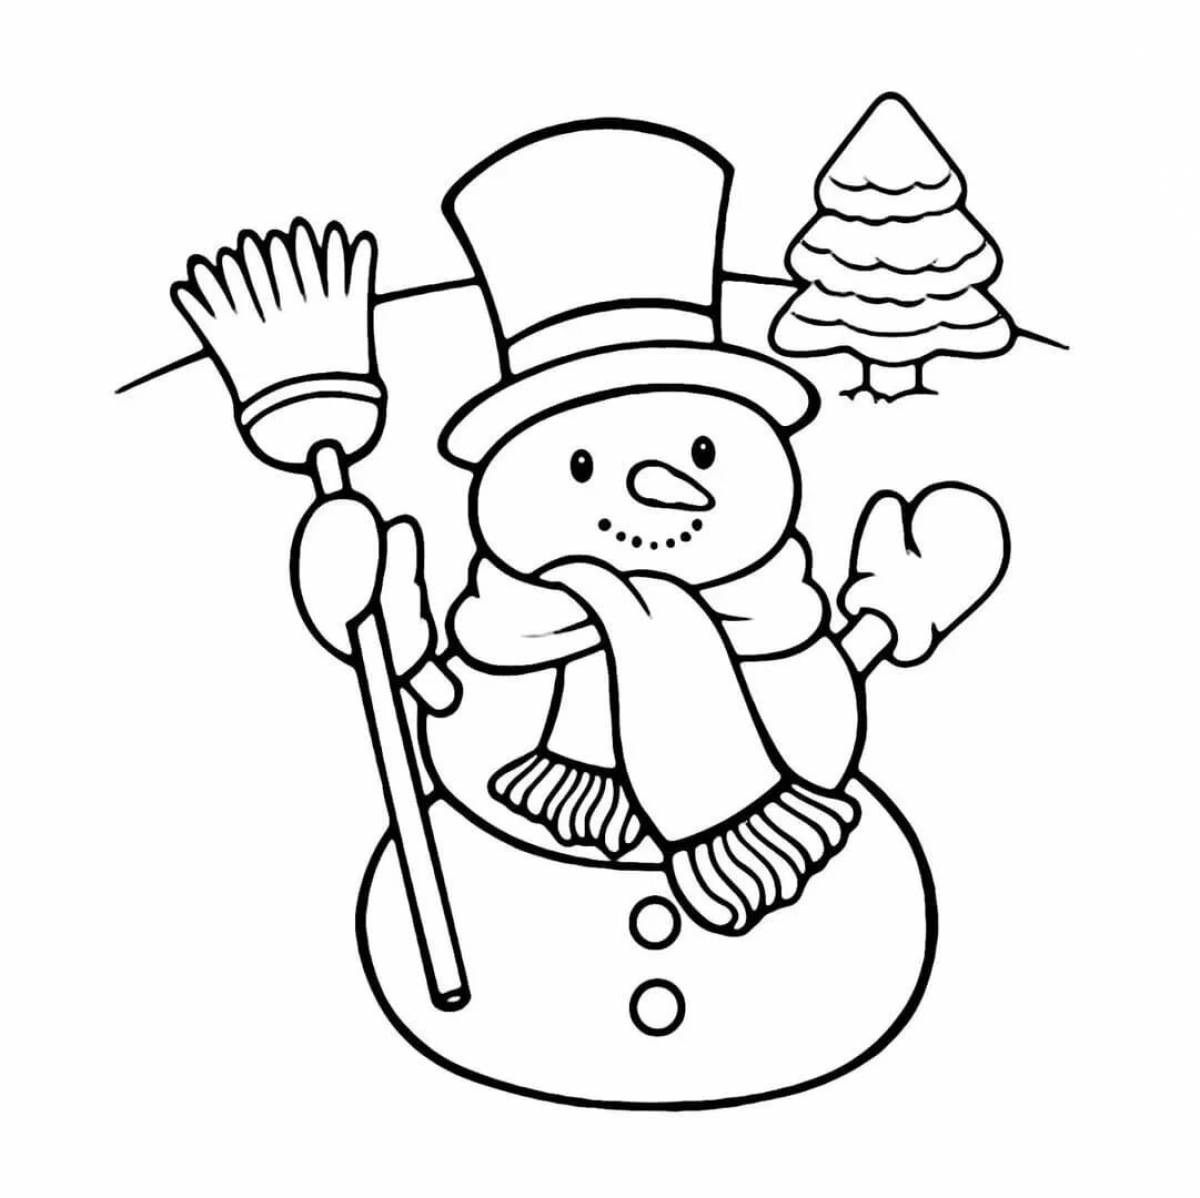 Funny snowman for kids #7